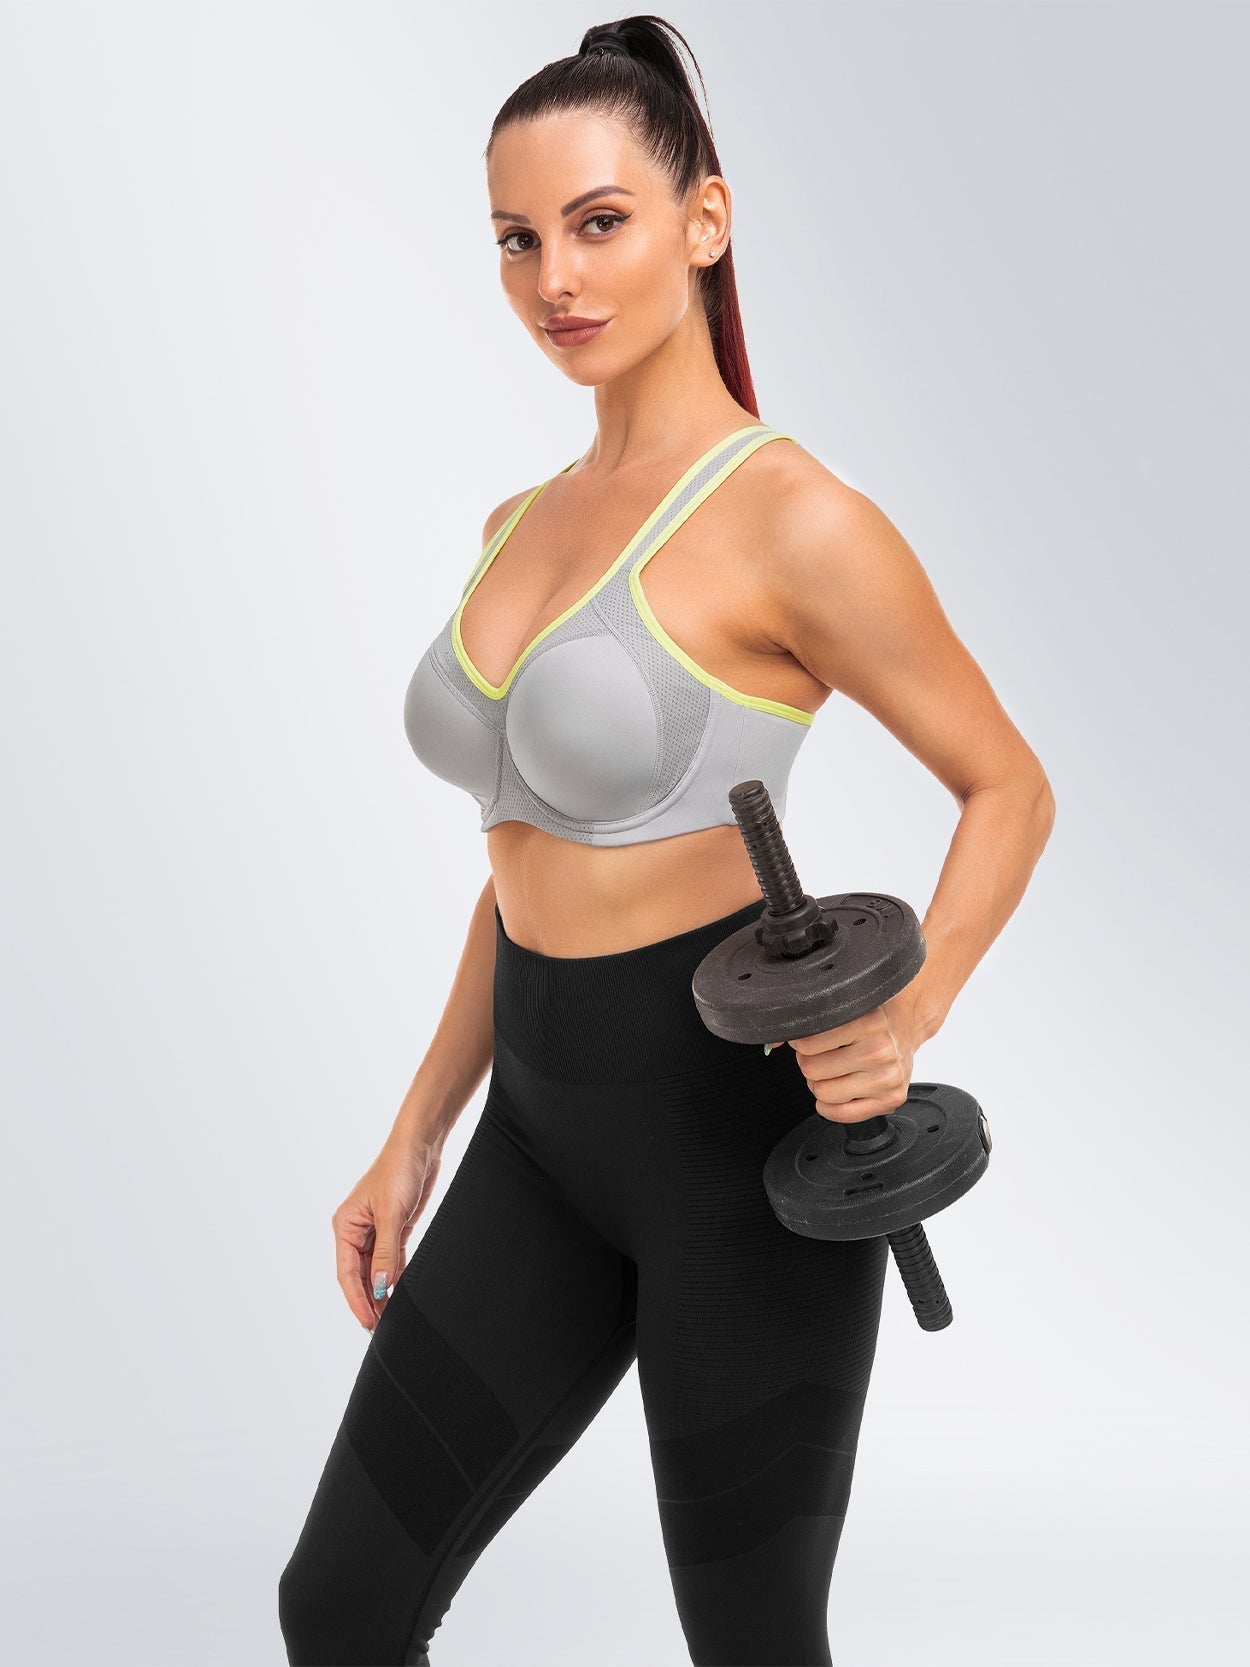 s Bestselling Workout Set Is On Sale For Up To 49% Off RN